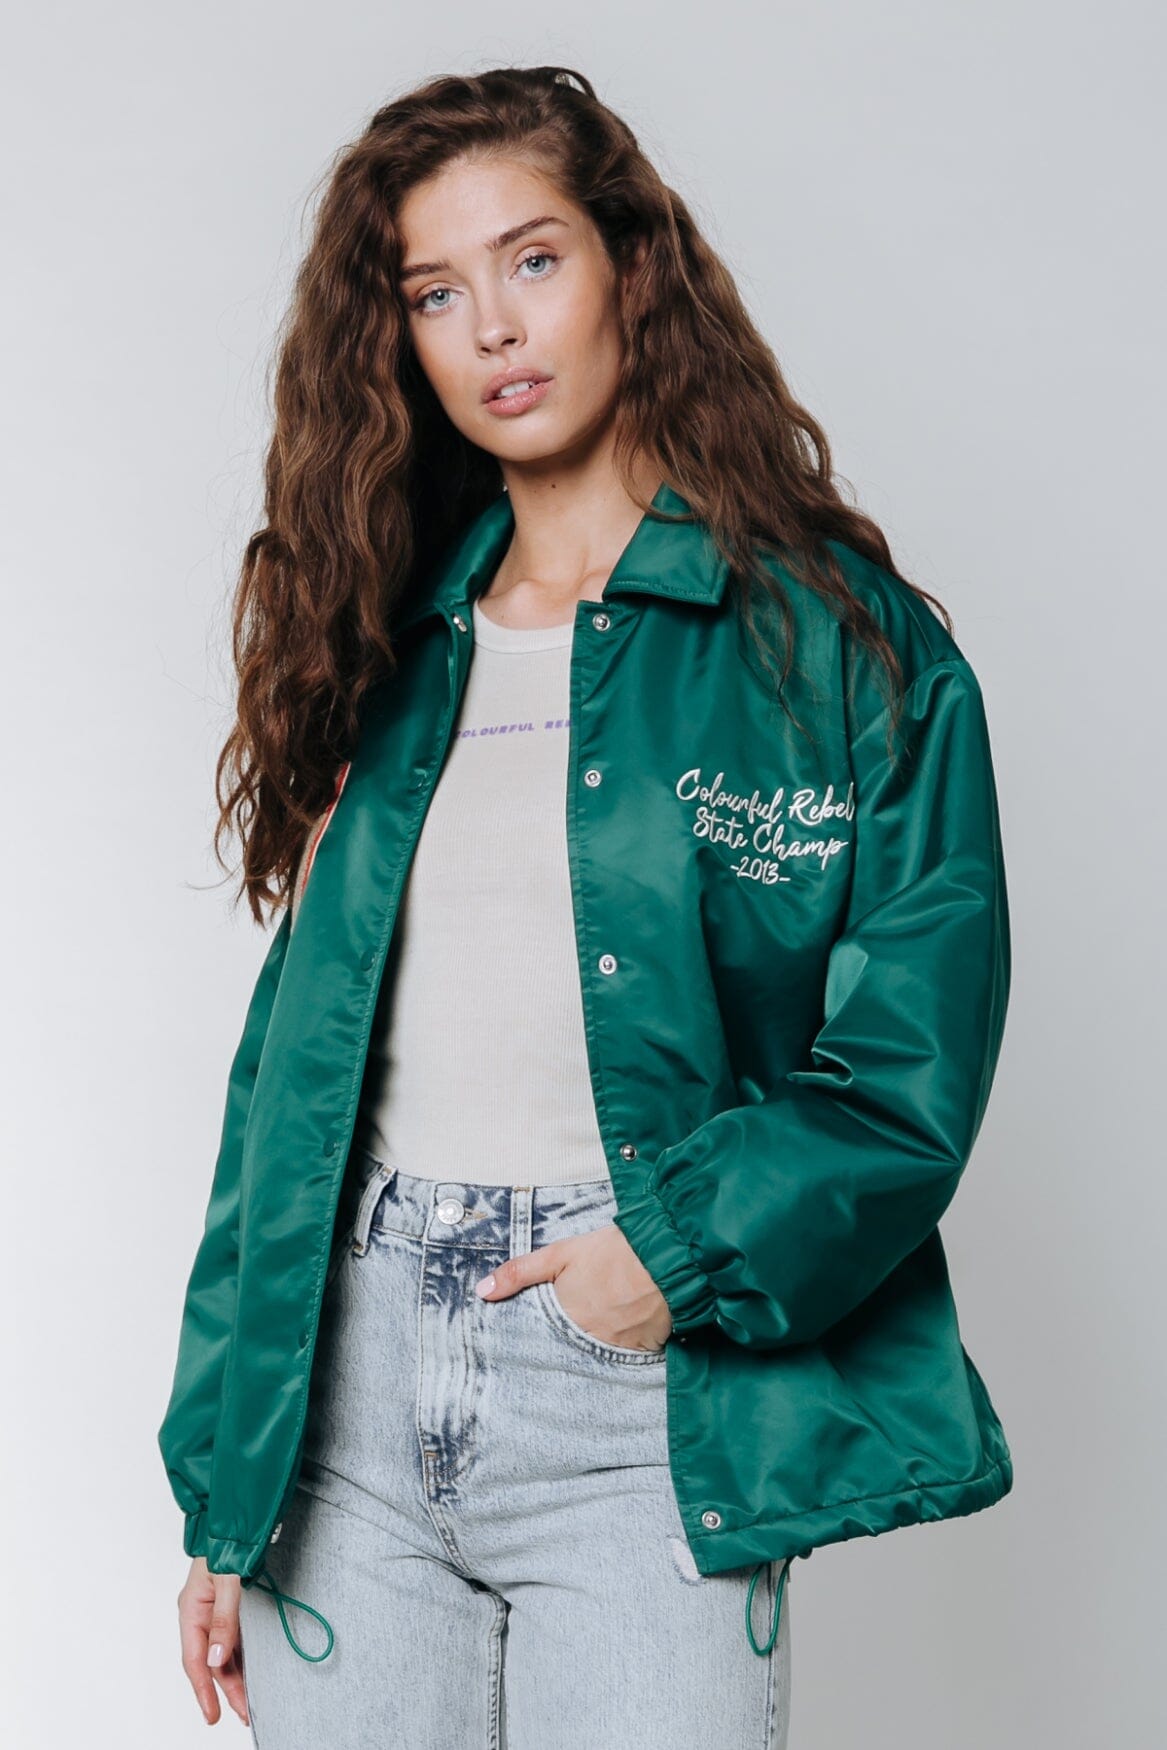 Colourful Rebel Ghis Sports Jacket | Olive Green